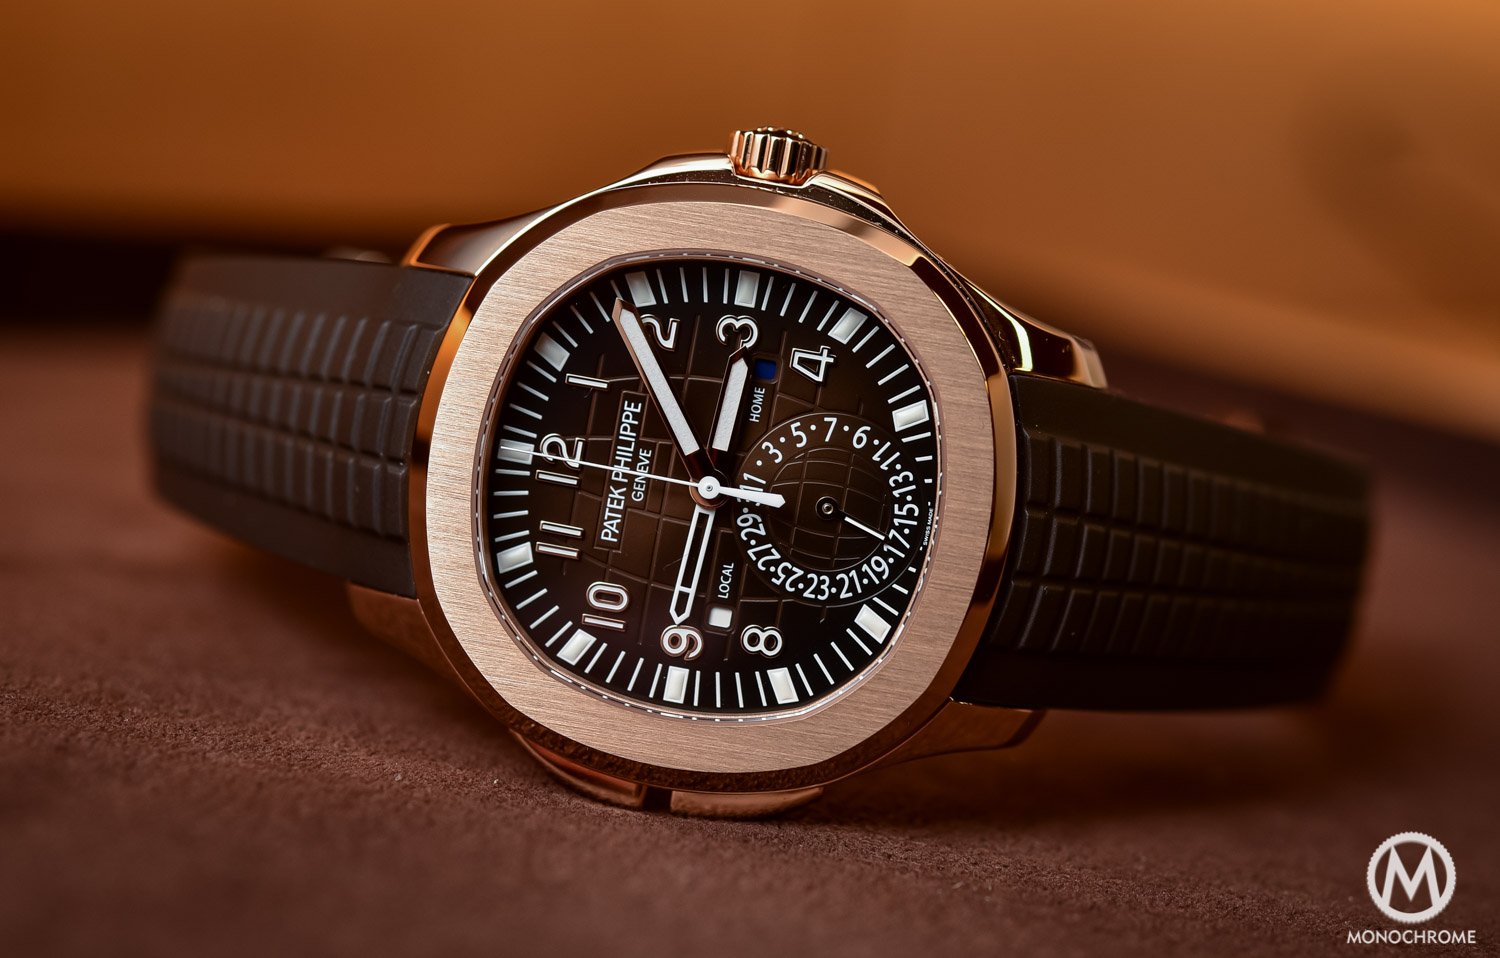 Top 5 Watches from Baselworld 2016 - Patek Philippe Aquanaut ref. 5164R - 1